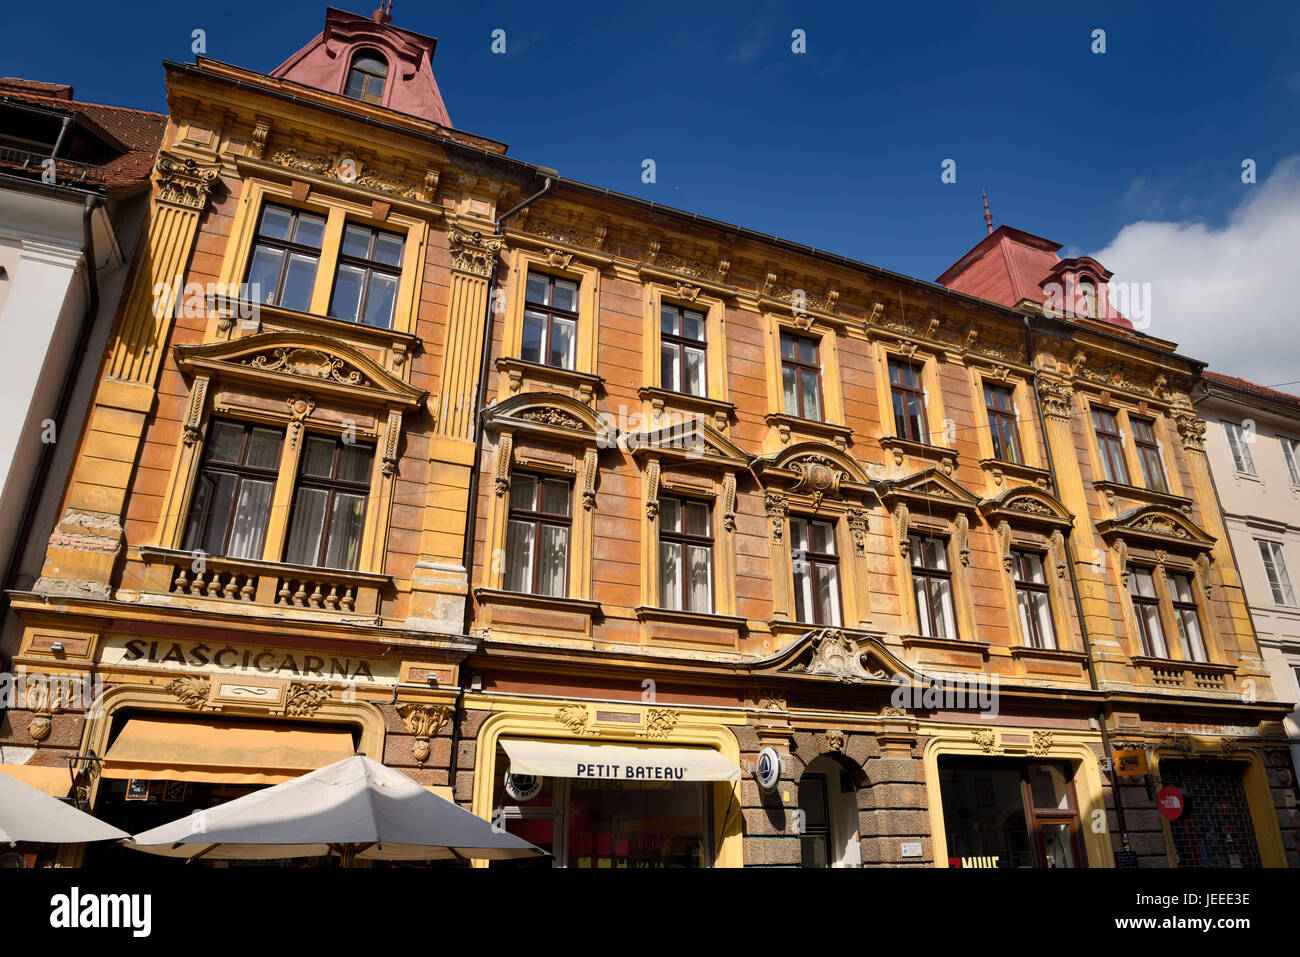 Gold colored historic building built 1898 on Old Square Stari trg with street shops Ljubljana Slovenia with blue sky Stock Photo